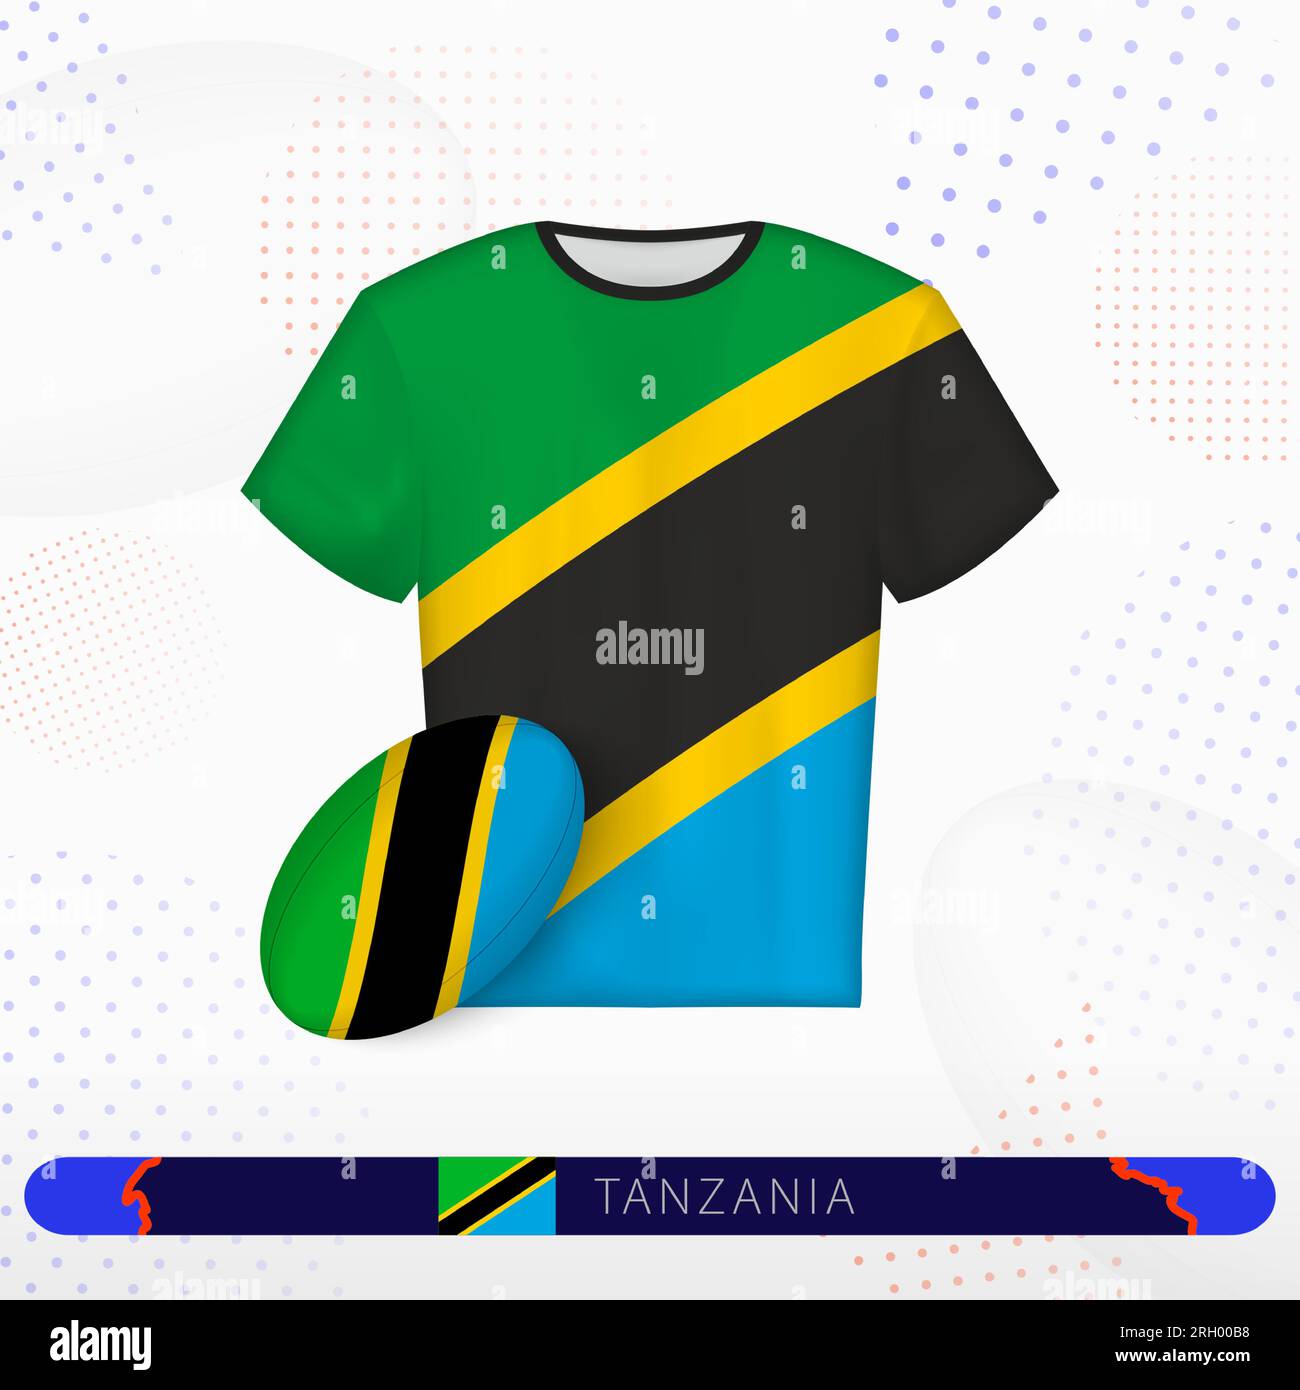 Tanzania rugby jersey with rugby ball of Tanzania on abstract sport background. Jersey design. Stock Vector